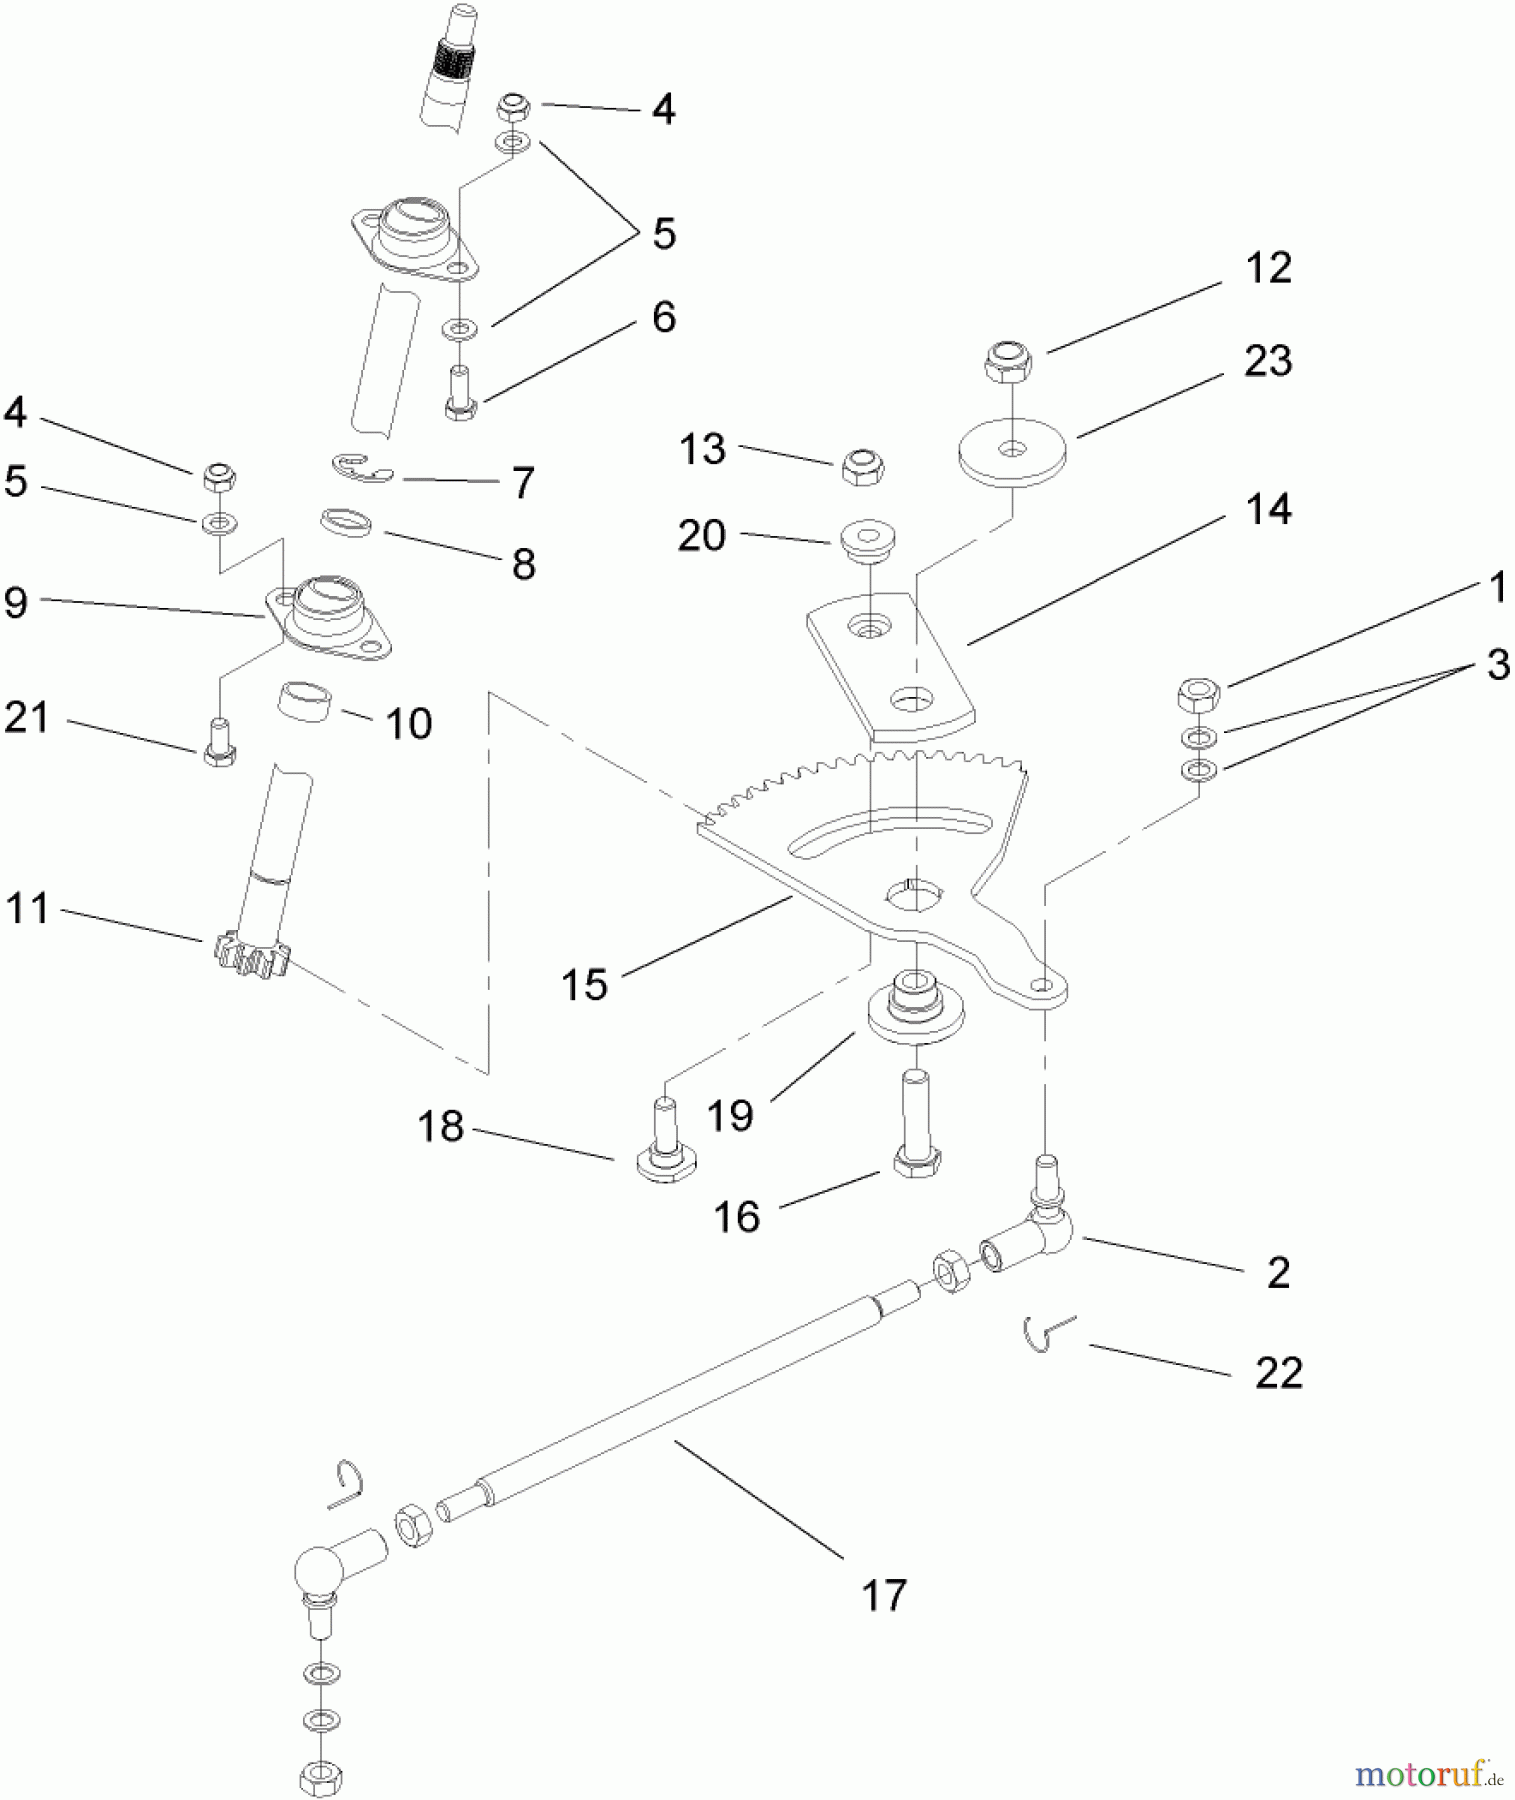  Toro Neu Mowers, Lawn & Garden Tractor Seite 1 74573 (DH 200) - Toro DH 200 Lawn Tractor, 2009 (290000481-290999999) STEERING ASSEMBLY